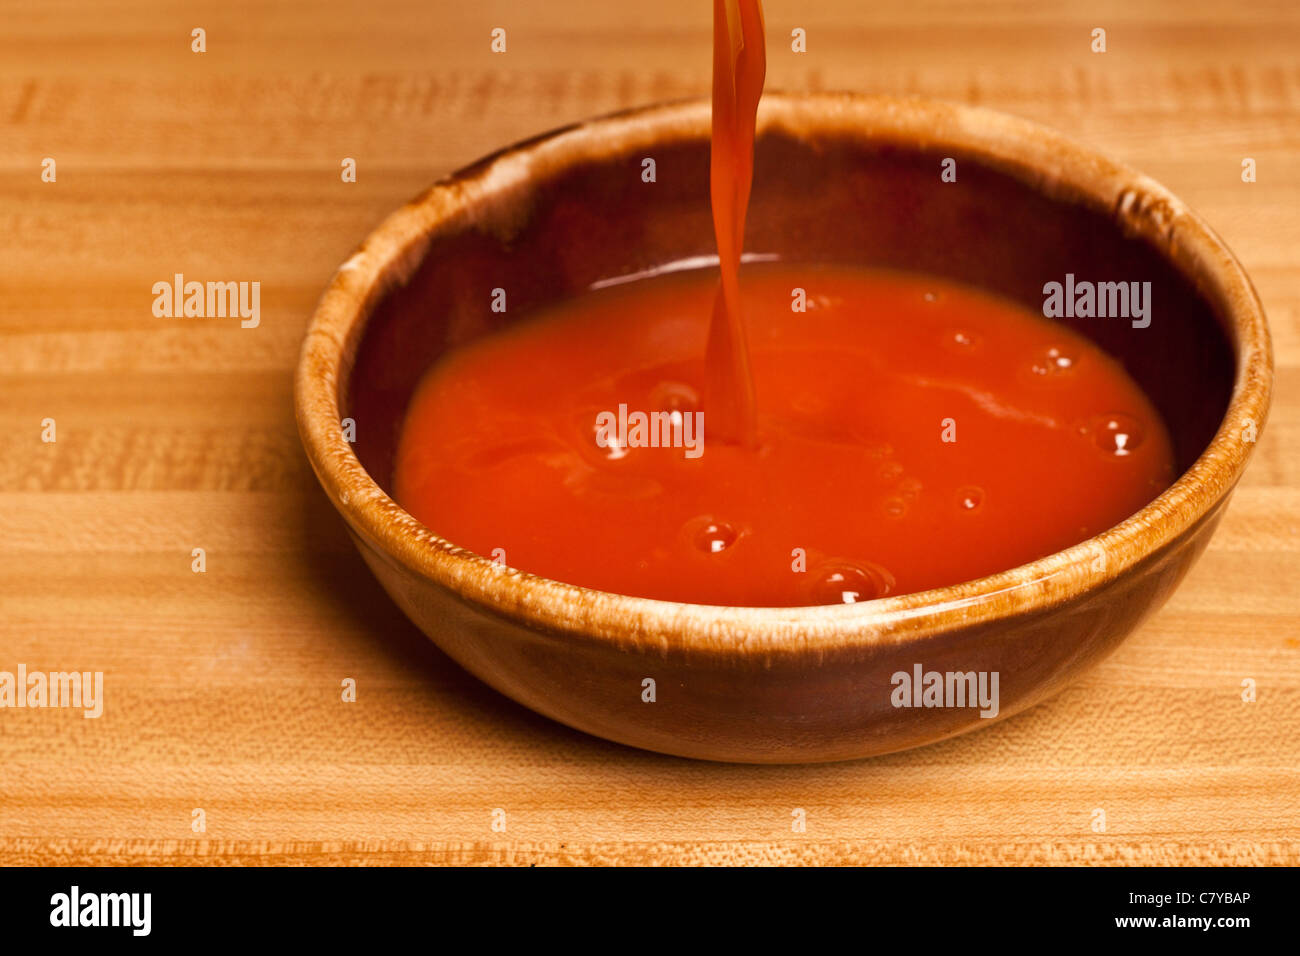 Tomato soup being poured into a ceramic bowl Stock Photo